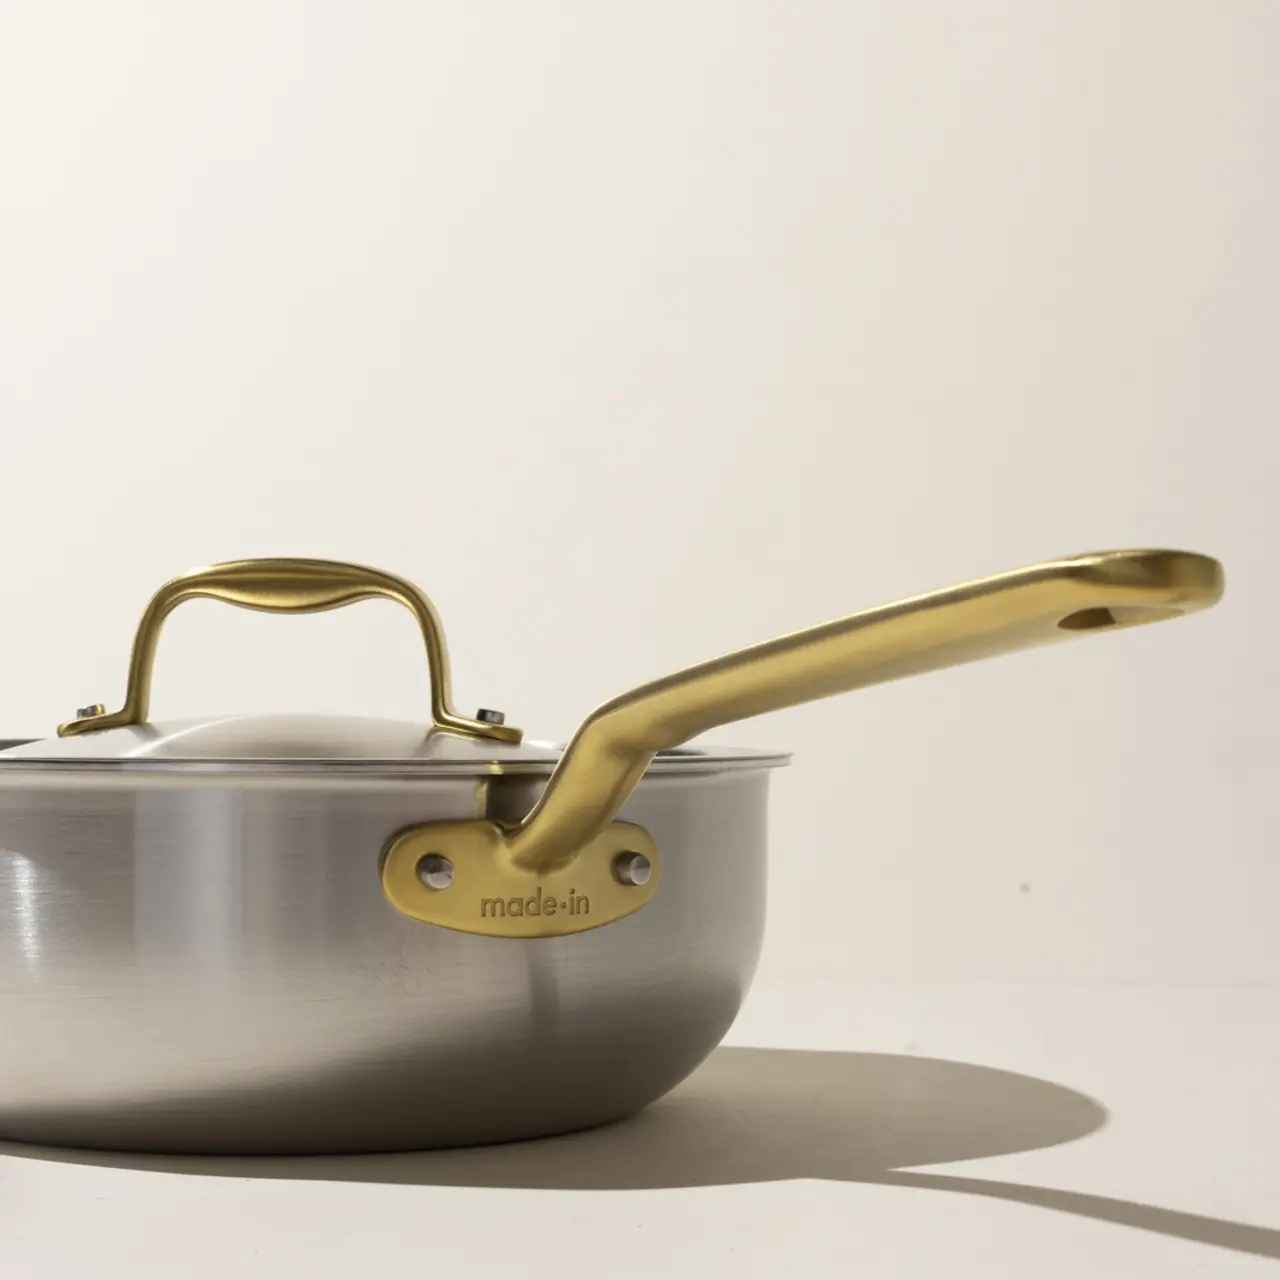 A stainless steel saucepan with a gold-colored handle and lid handle set against a neutral background.